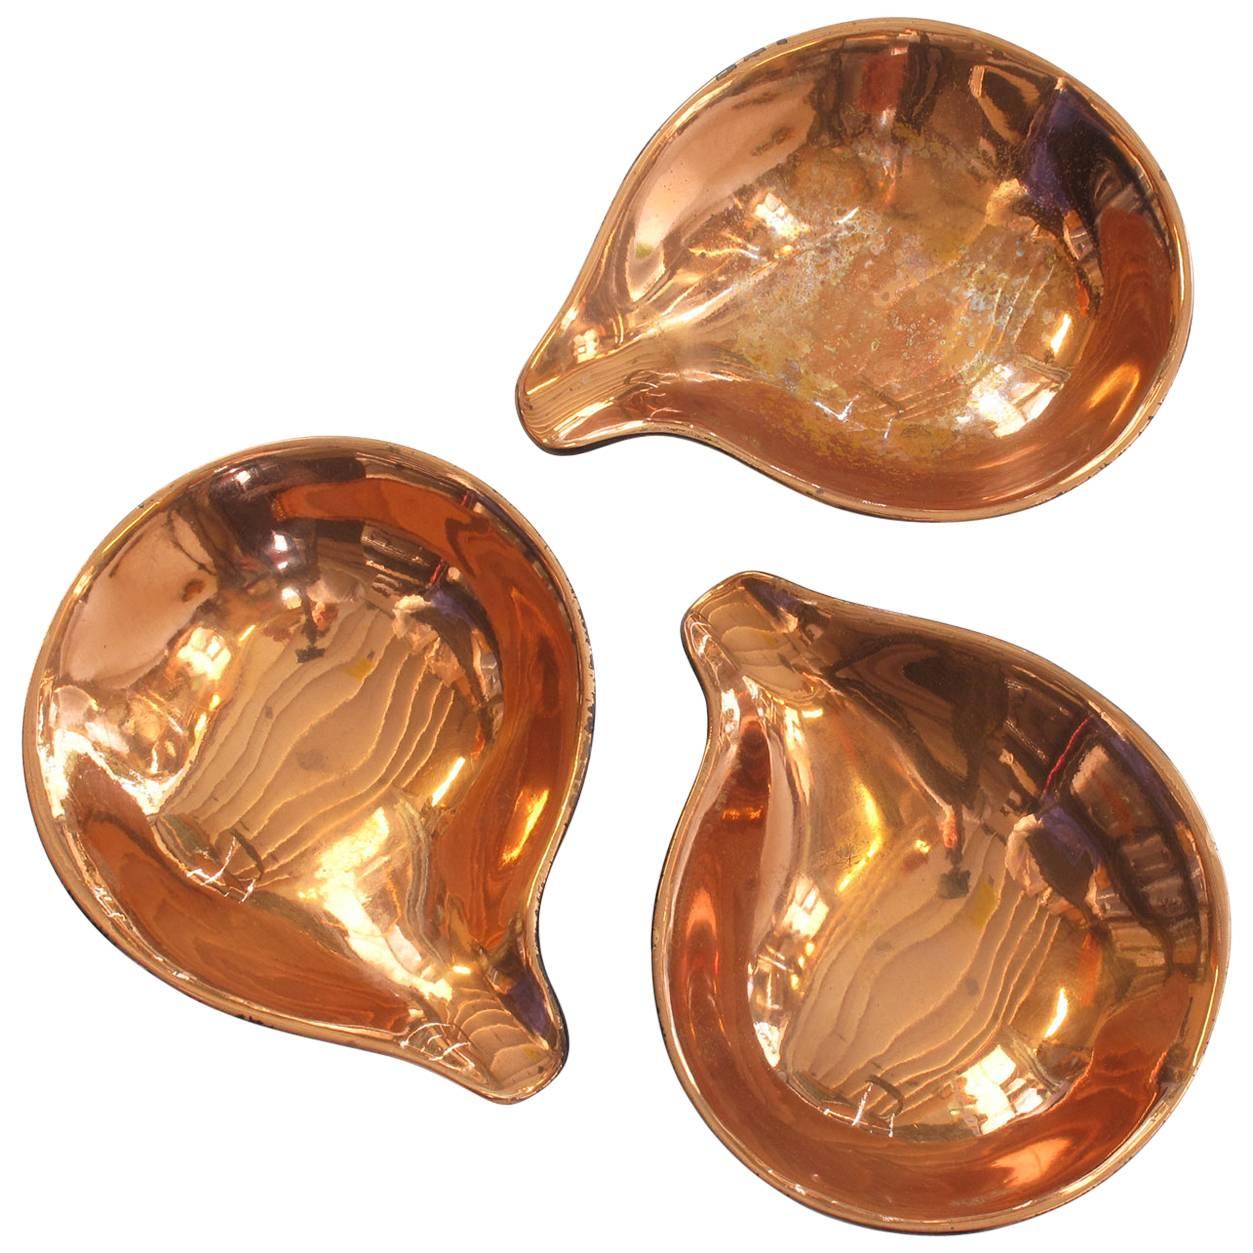 Set of Three Ben Seibel Biomorphic Copper Nesting Objects, 1950s For Sale